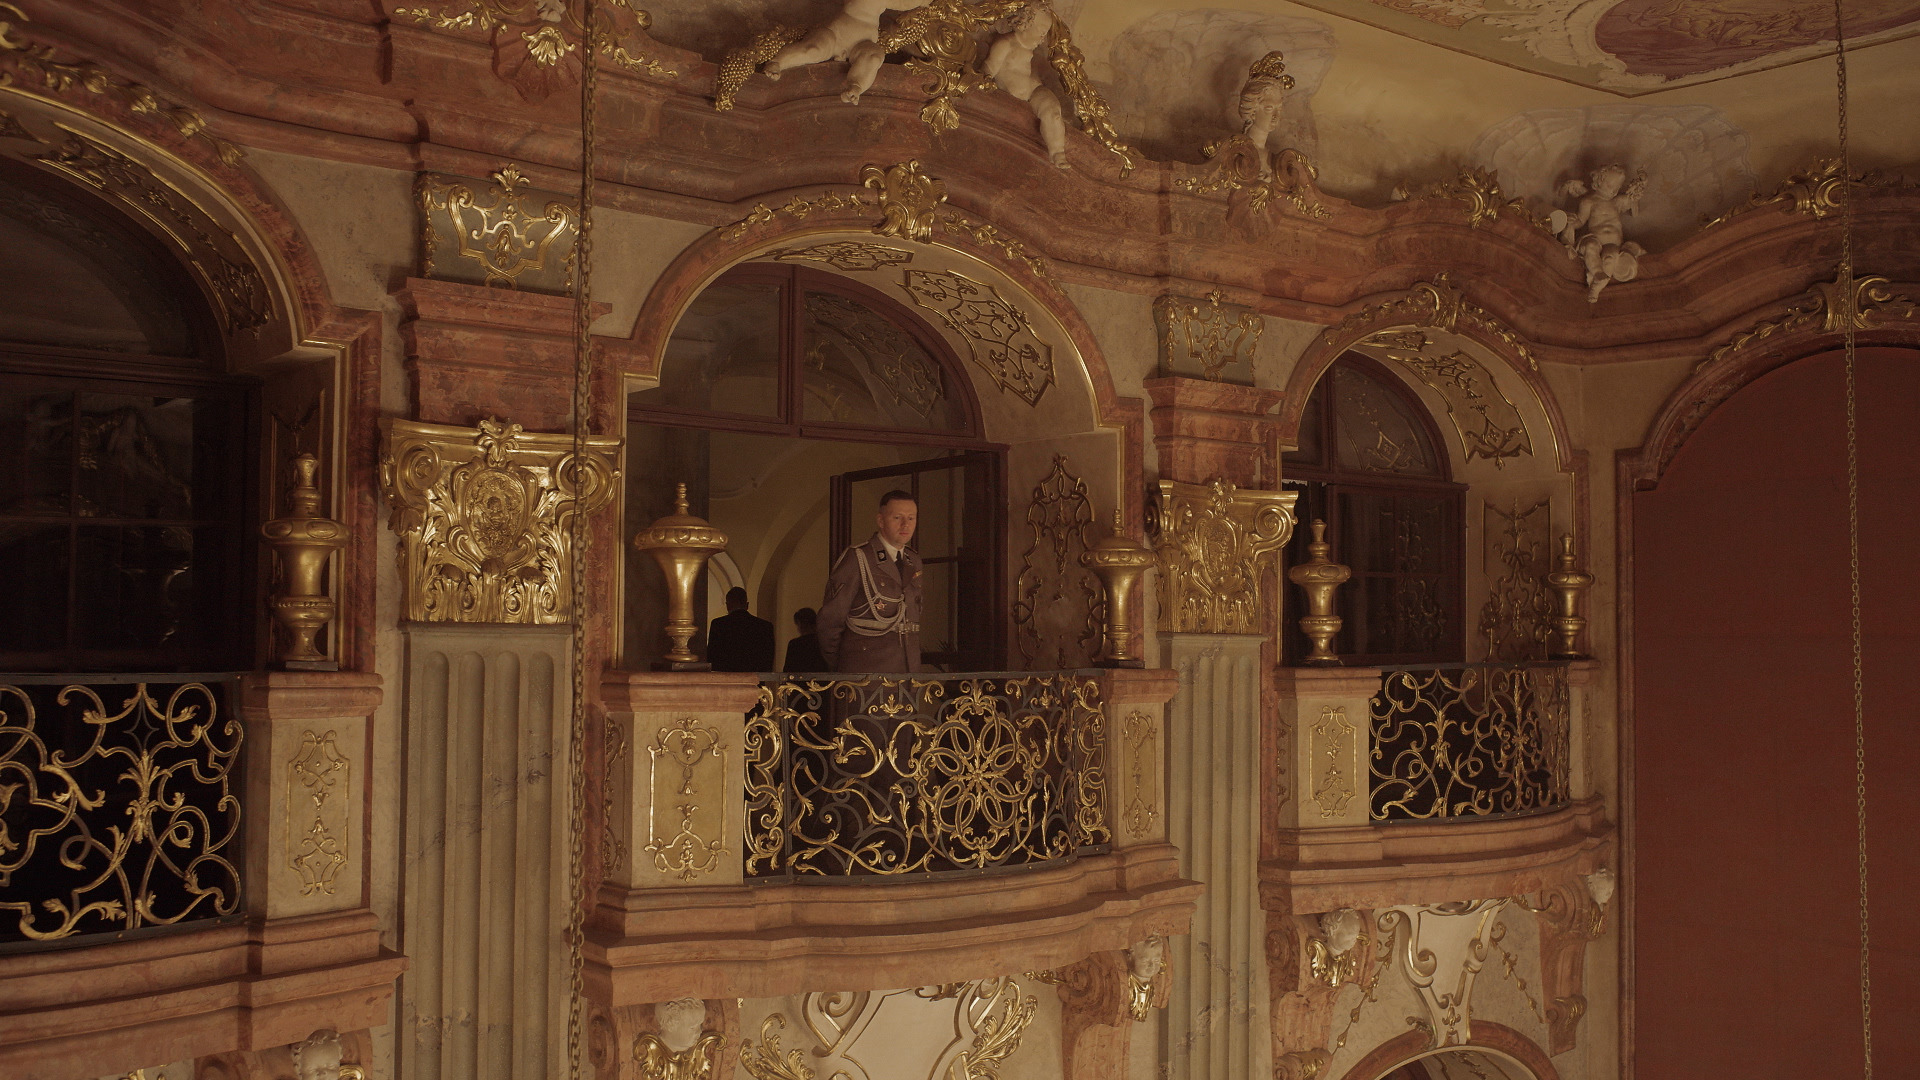 Man in uniform looks out from ornate balcony in gilded, heavily decorative space